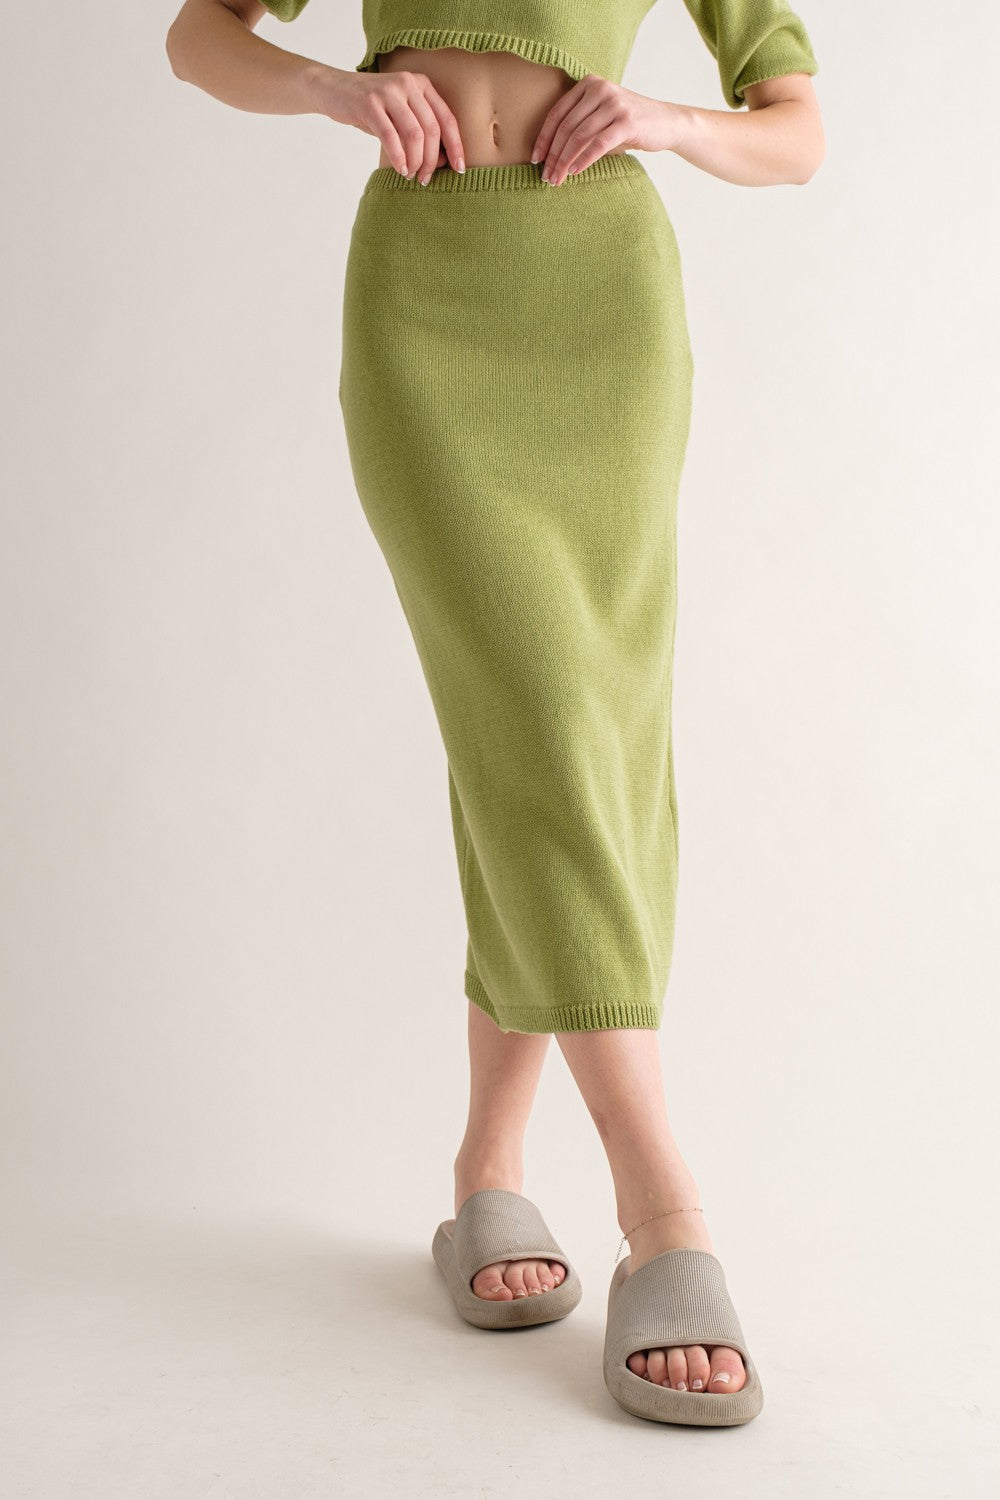 The Logan Knit Midi Skirt in apple green is made with 100% cotton knit fabric for a comfortable wear. It features a midi skirt length and matching set, with an elastic waist band for a perfect fit. This skirt is perfect for everyday wear.